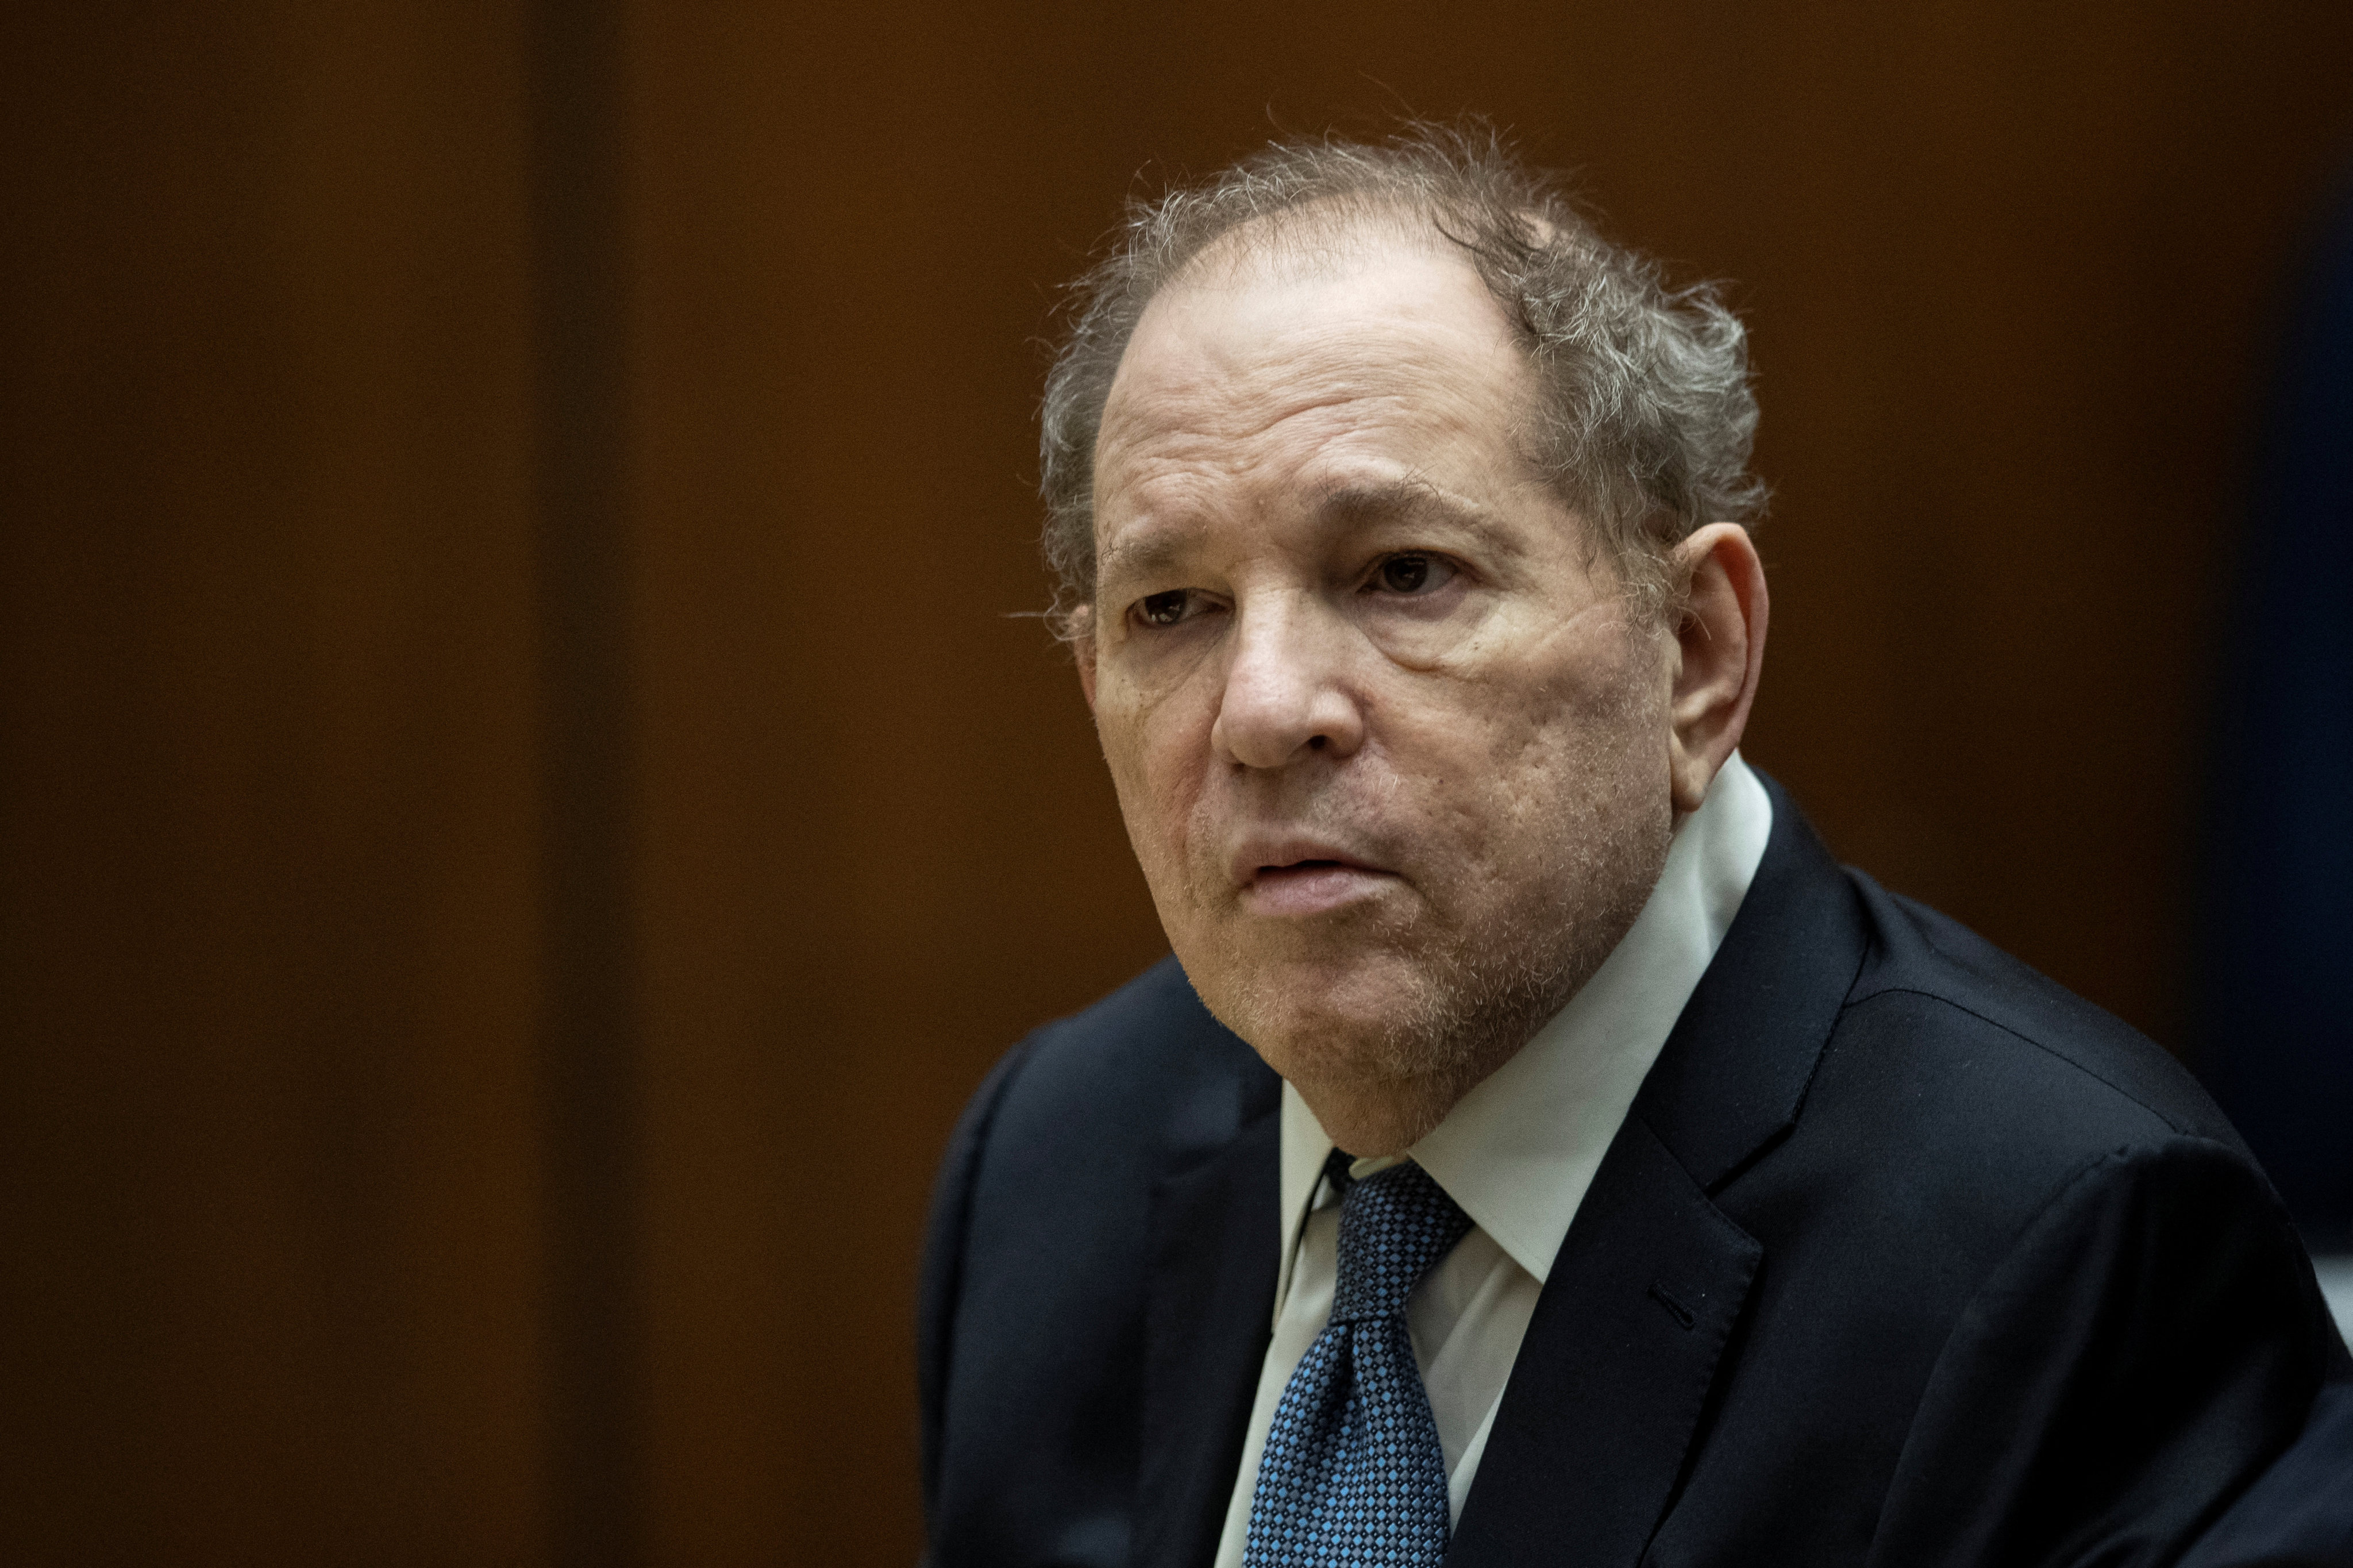 Harvey Weinstein appears in court at the Clara Shortridge Foltz Criminal Justice Centre in Los Angeles, California, US on Tuesday. Photo: Etienne Laurent / Pool via Reuters